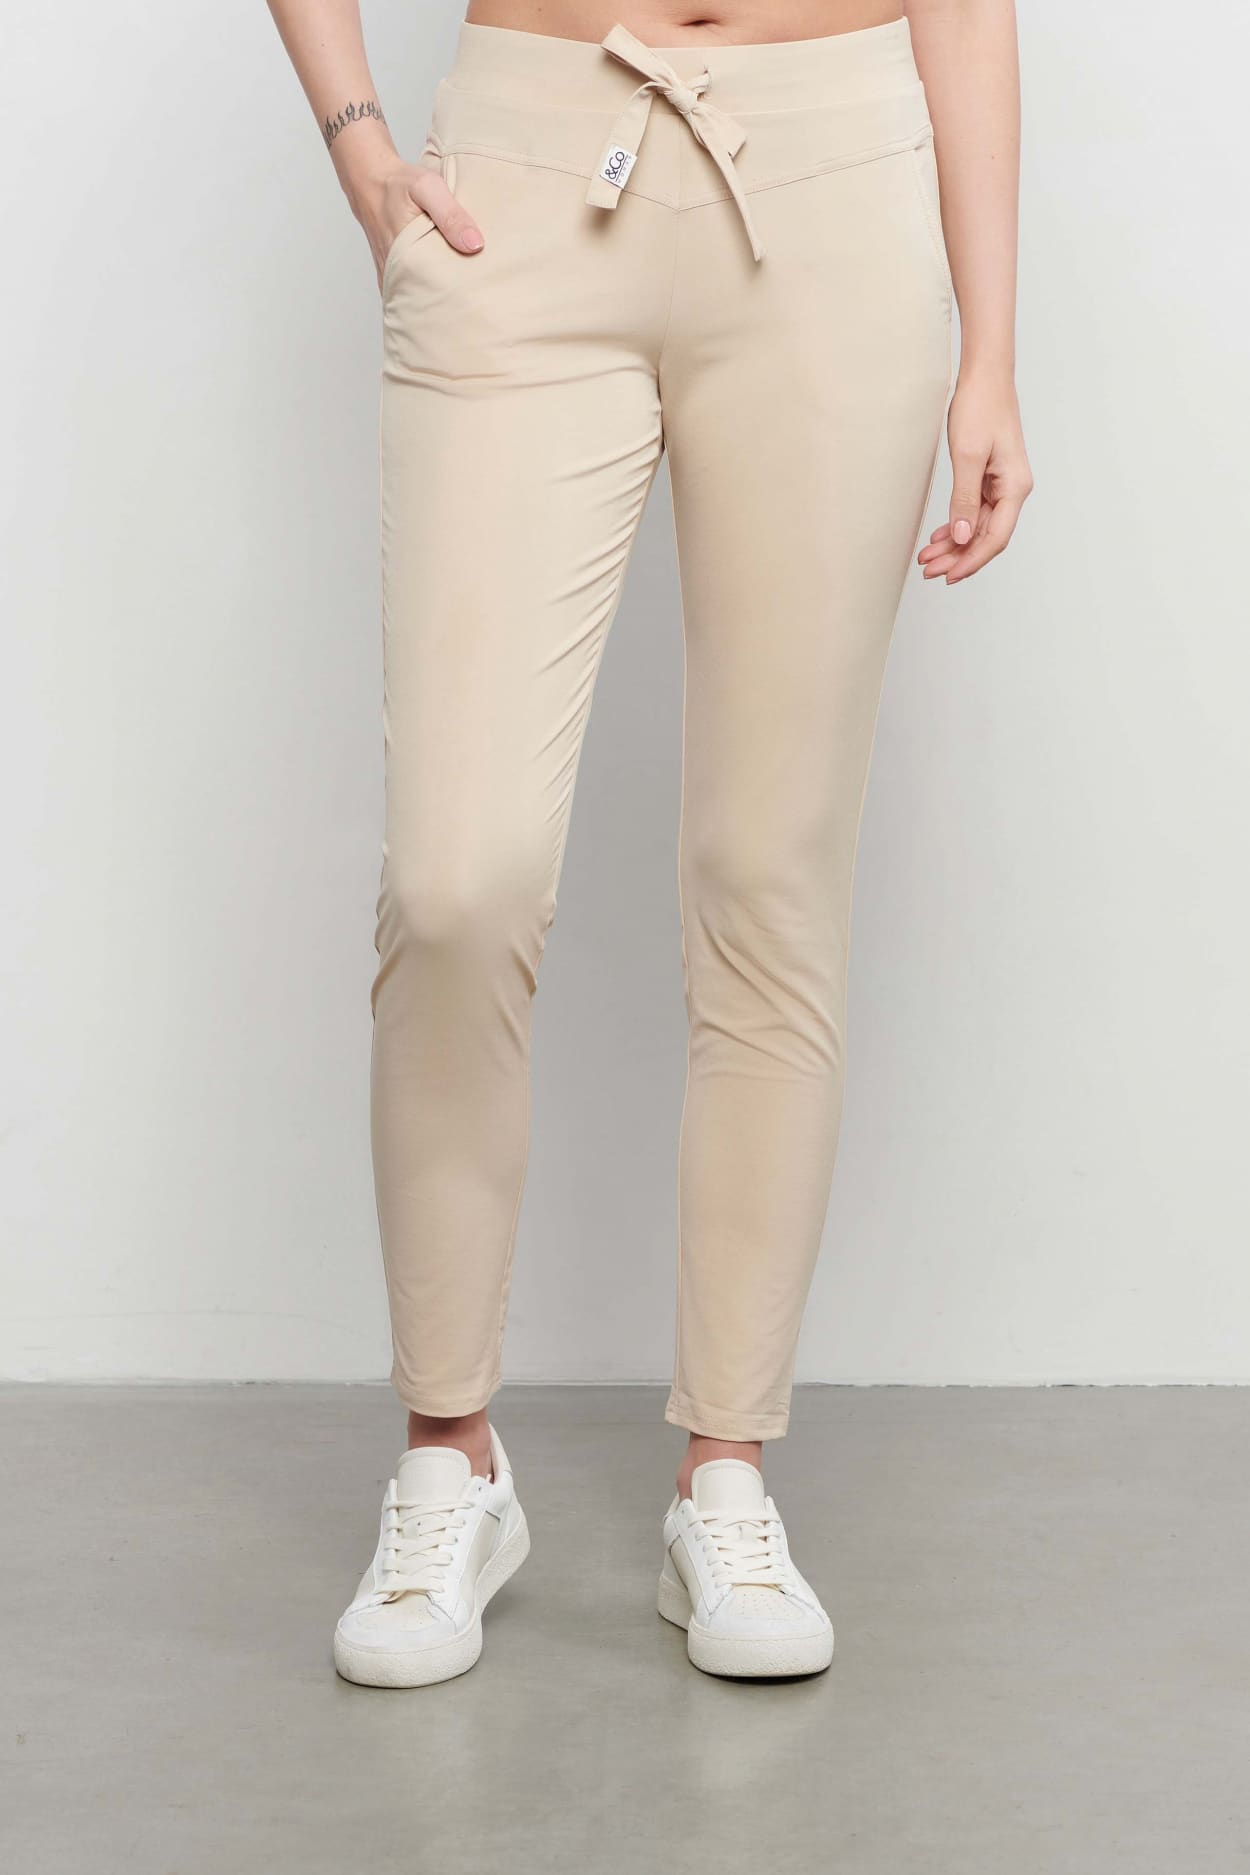 &Co Woman Peppe Travel Pant - Light Sand